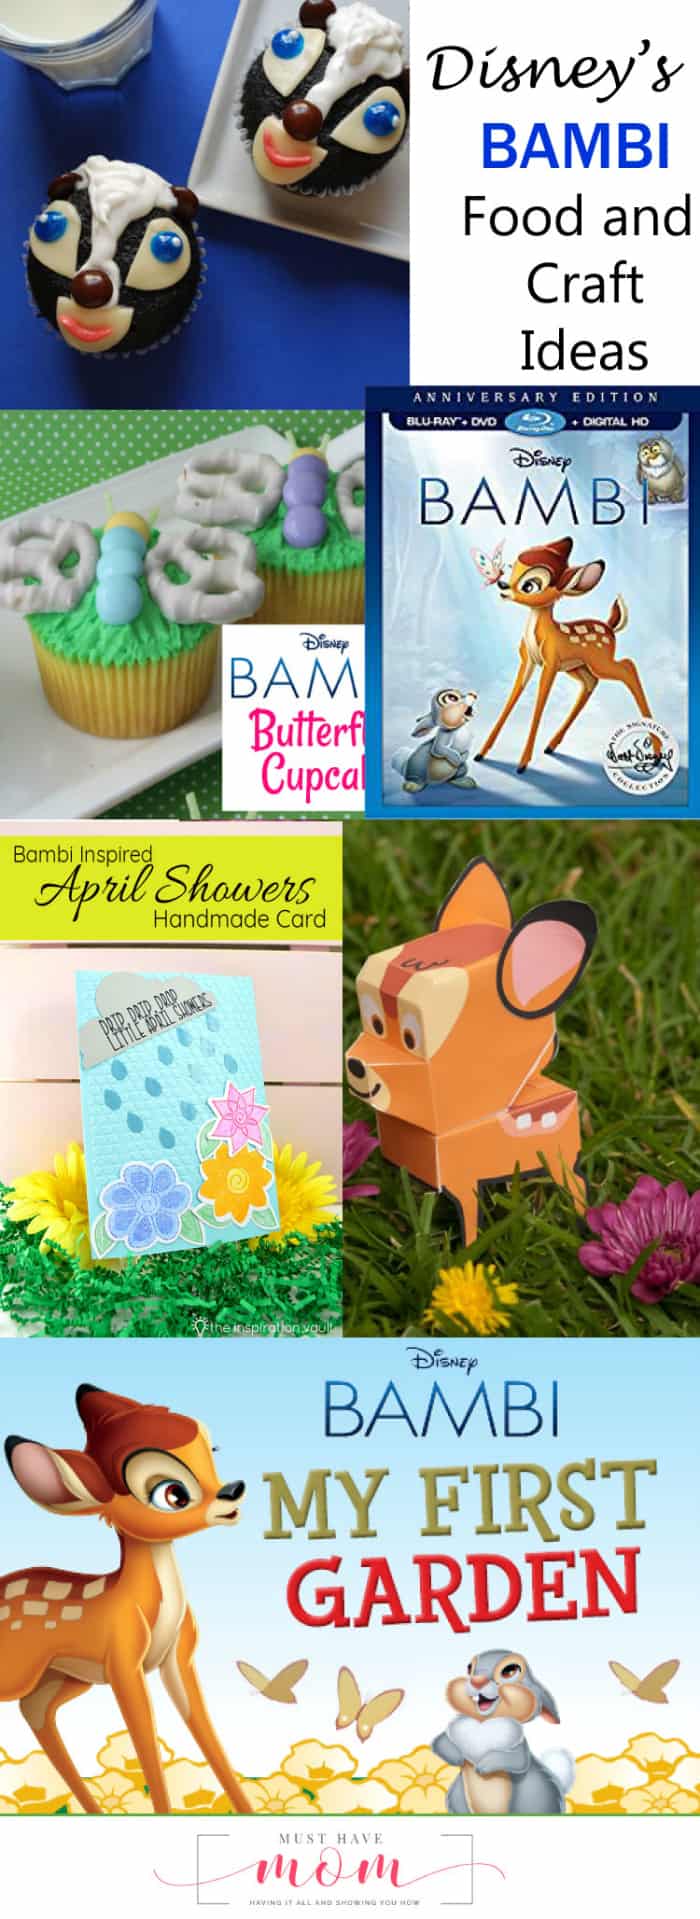 Whether you are planning a Bambi party or just want to serve some fun Bambi food and plan Bambi crafts for your movie night, I've got you covered. 